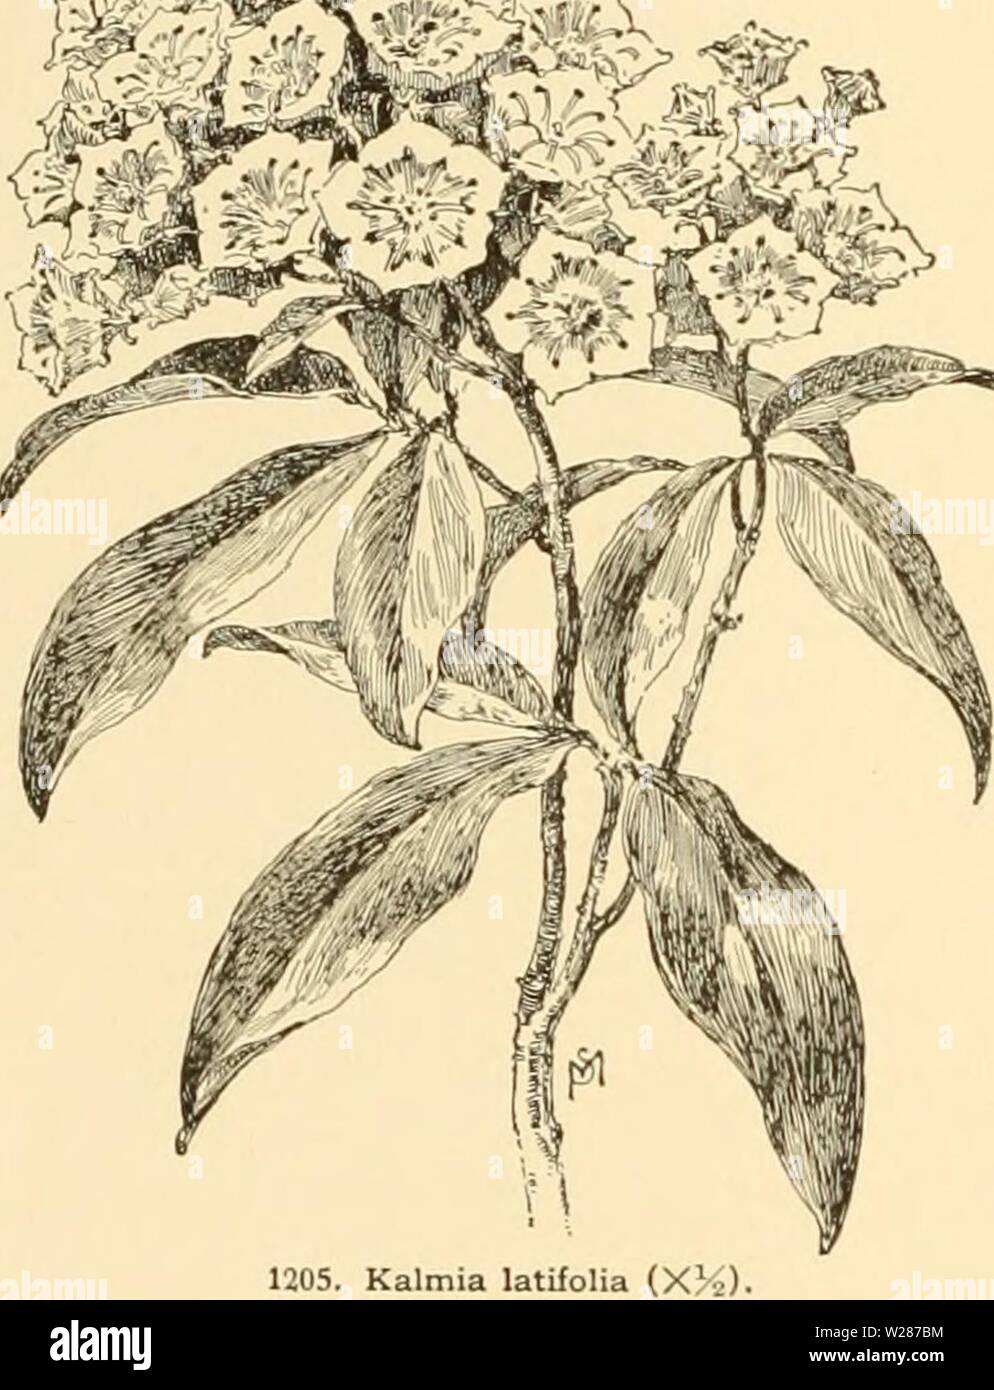 Archive image from page 377 of Cyclopedia of American horticulture . Cyclopedia of American horticulture : comprising suggestions for cultivation of horticultural plants, descriptions of the species of fruits, vegetables, flowers, and ornamental plants sold in the United States and Canada, together with geographical and biographical sketches  cyclopediaofame02bail Year: 1906  854 KALMIA decorative, contrasting well with the red and yellowish branches. The species is also easily forced and makes a very handsome pot-plant. The other species are pretty border plants for evergreen shrubberies. The Stock Photo